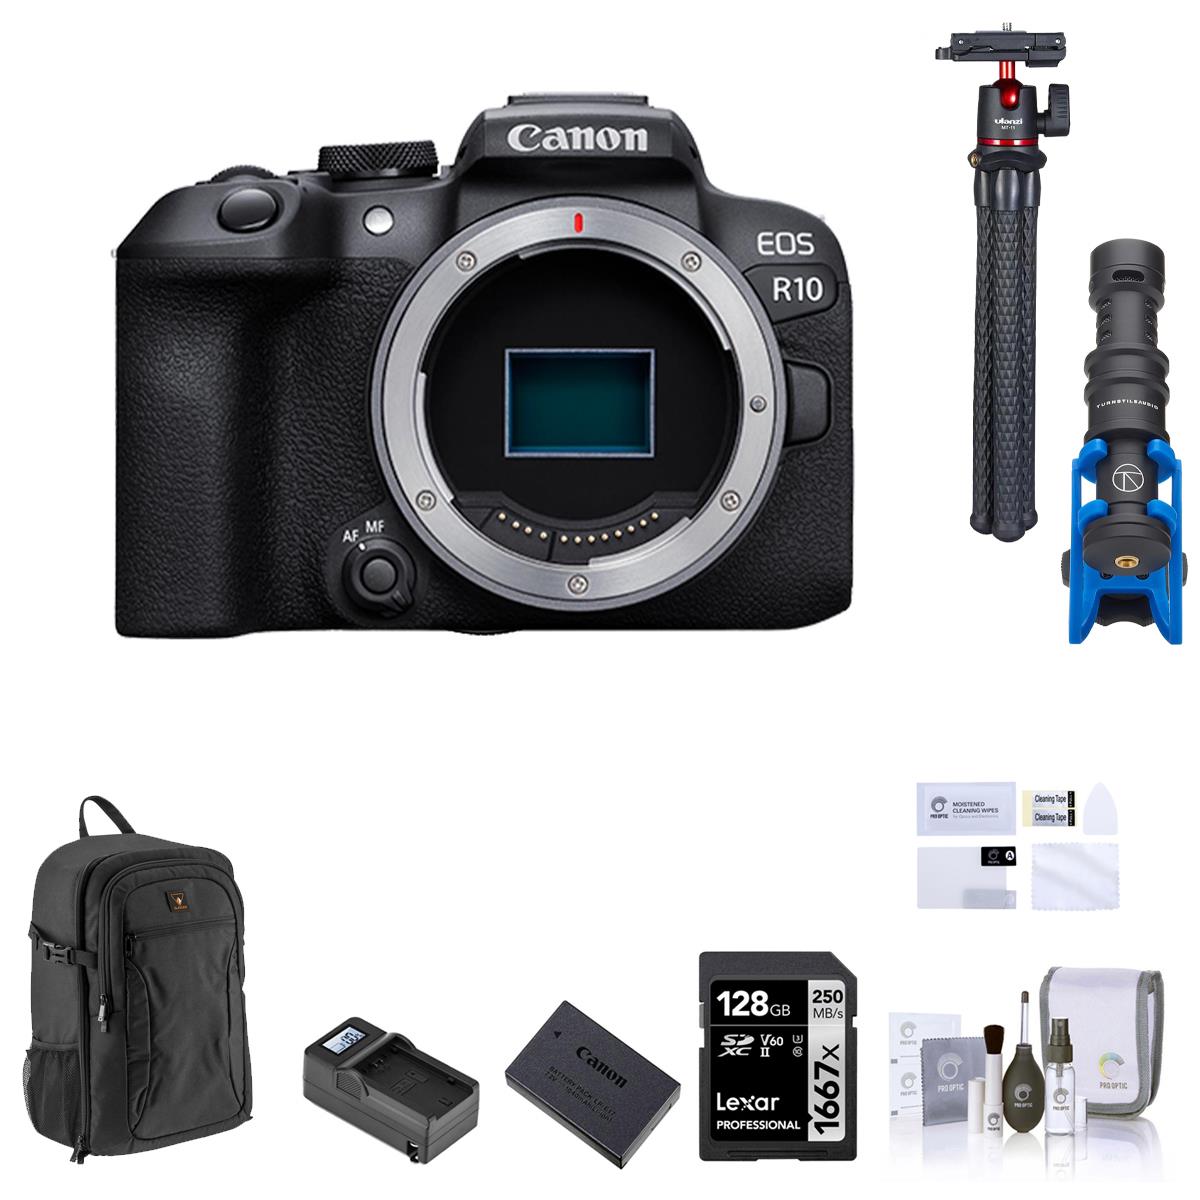 Image of Canon EOS R10 Mirrorless Digital Camera Body with Vlogger Accessories Kit